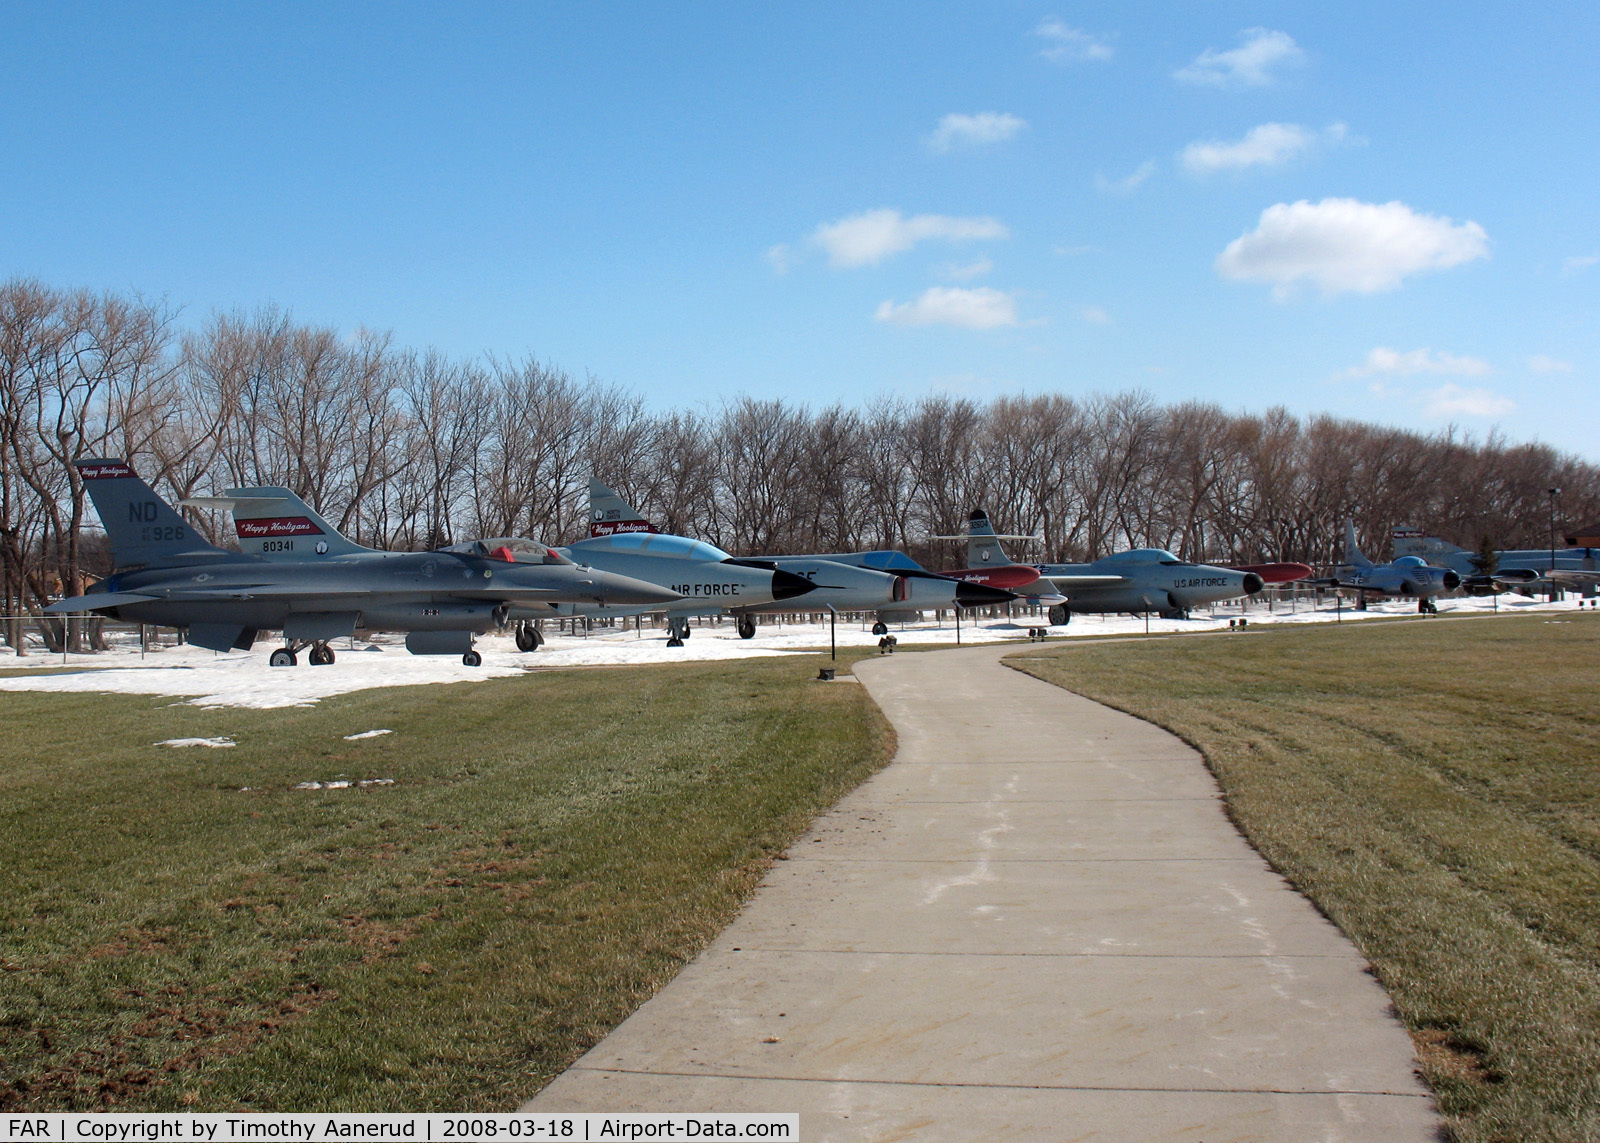 Hector International Airport (FAR) - North Dakota Air National Guard display area. F-16, F-101, F-102, F-94, F-89, F-4. Not visible is a P-51, and another F-4